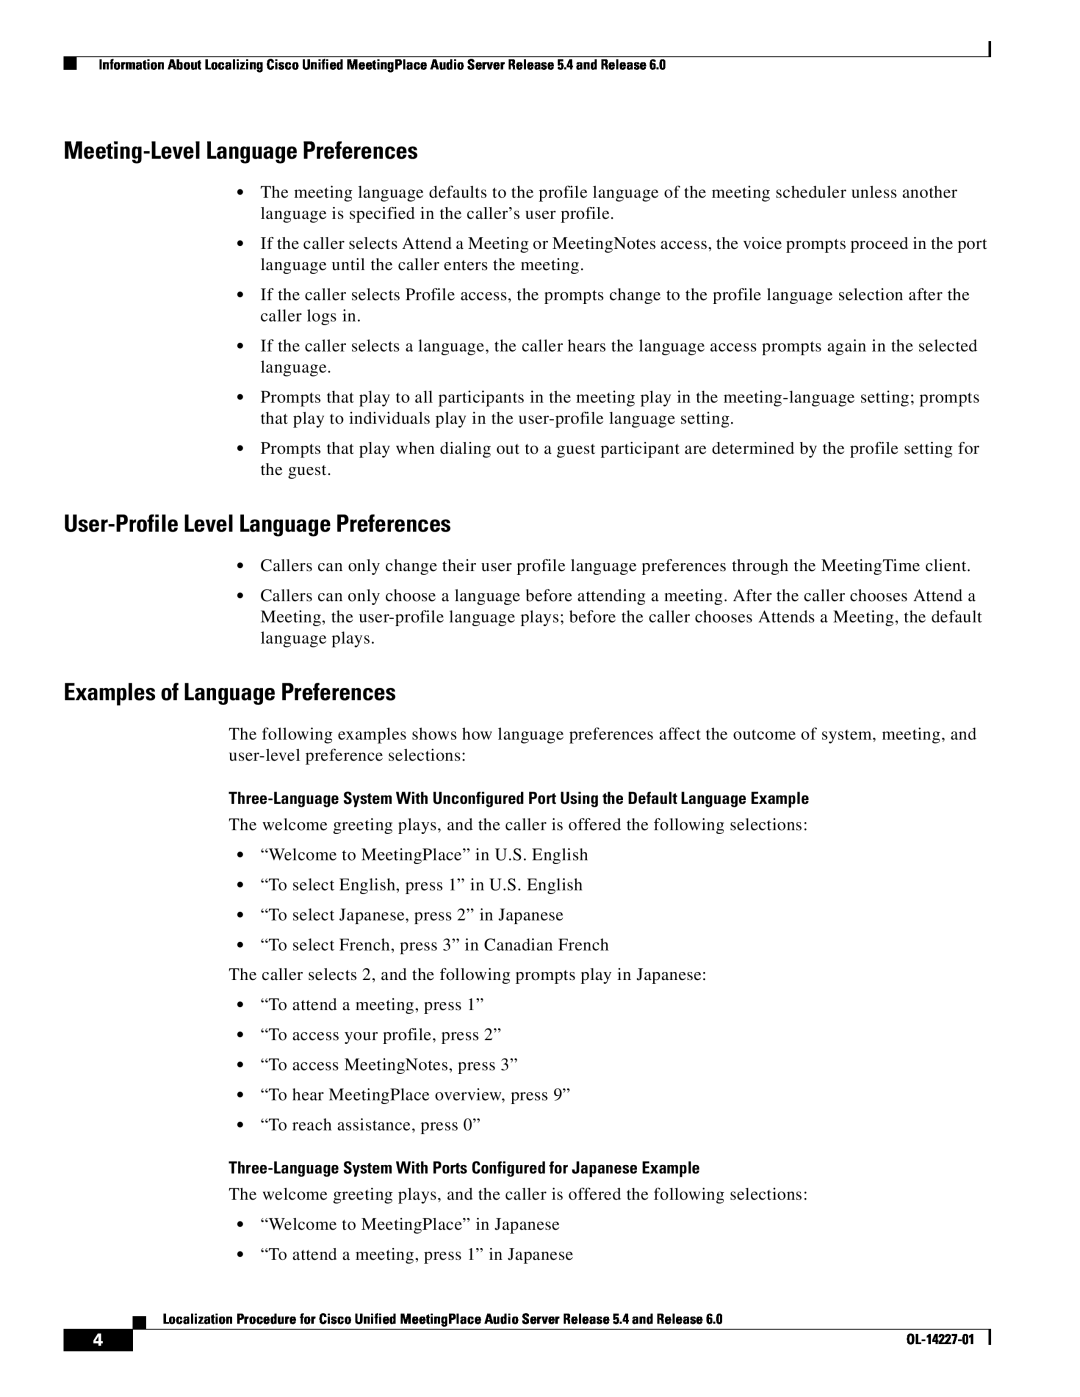 Cisco Systems 5.4, 6 manual Meeting-Level Language Preferences, User-Profile Level Language Preferences 